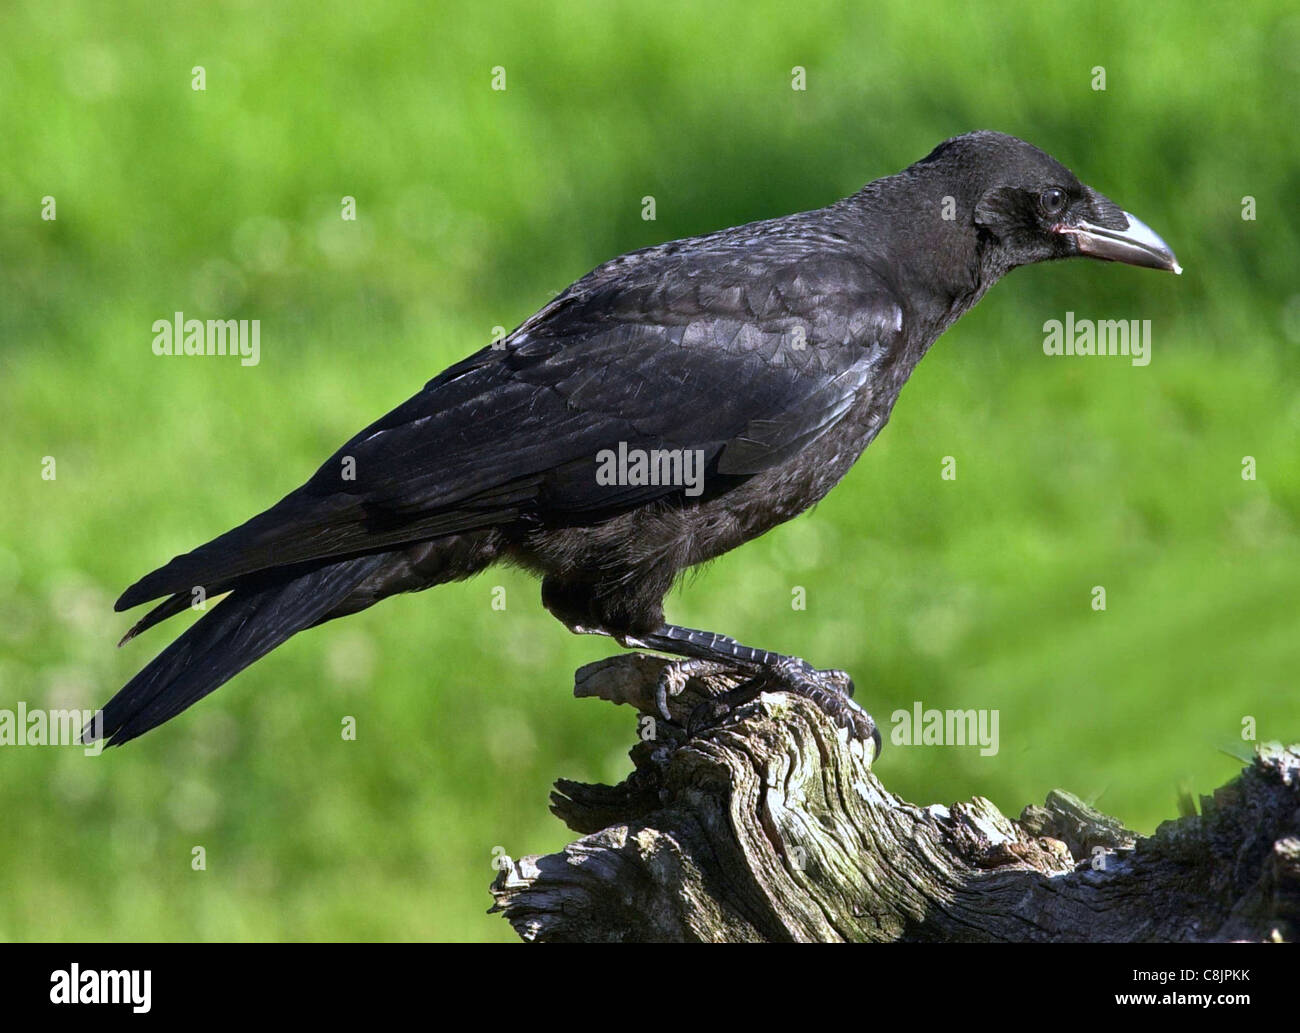 CROW The Carrion Crow (Latin: Corvus Corone Corone) Solitary British resident bird wary of human contact and enjoying considerable intelligence. Stock Photo